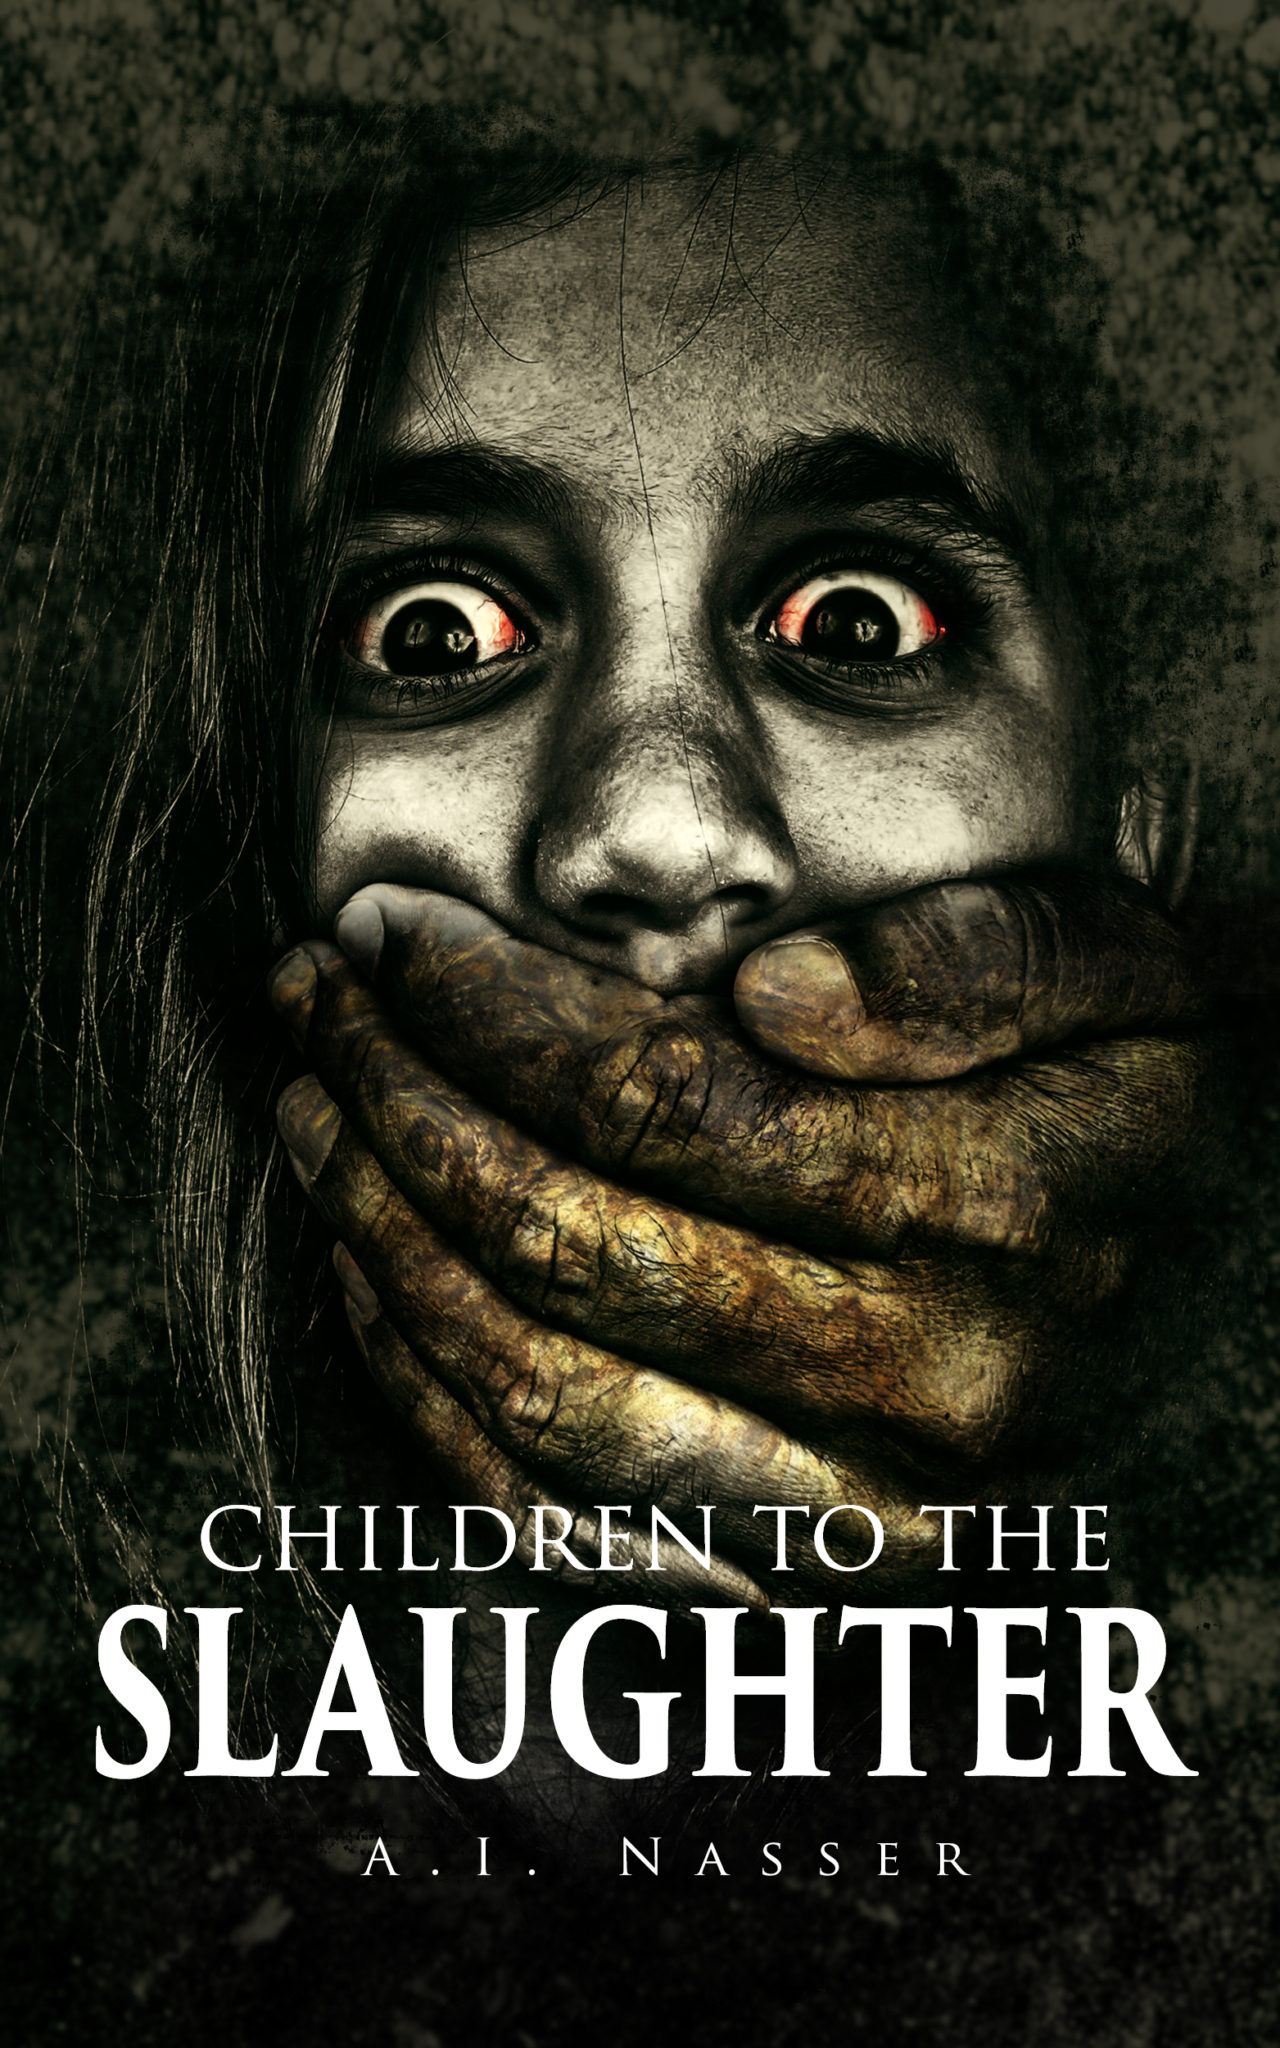 FREE: Children To The Slaughter by A.I. Nasser